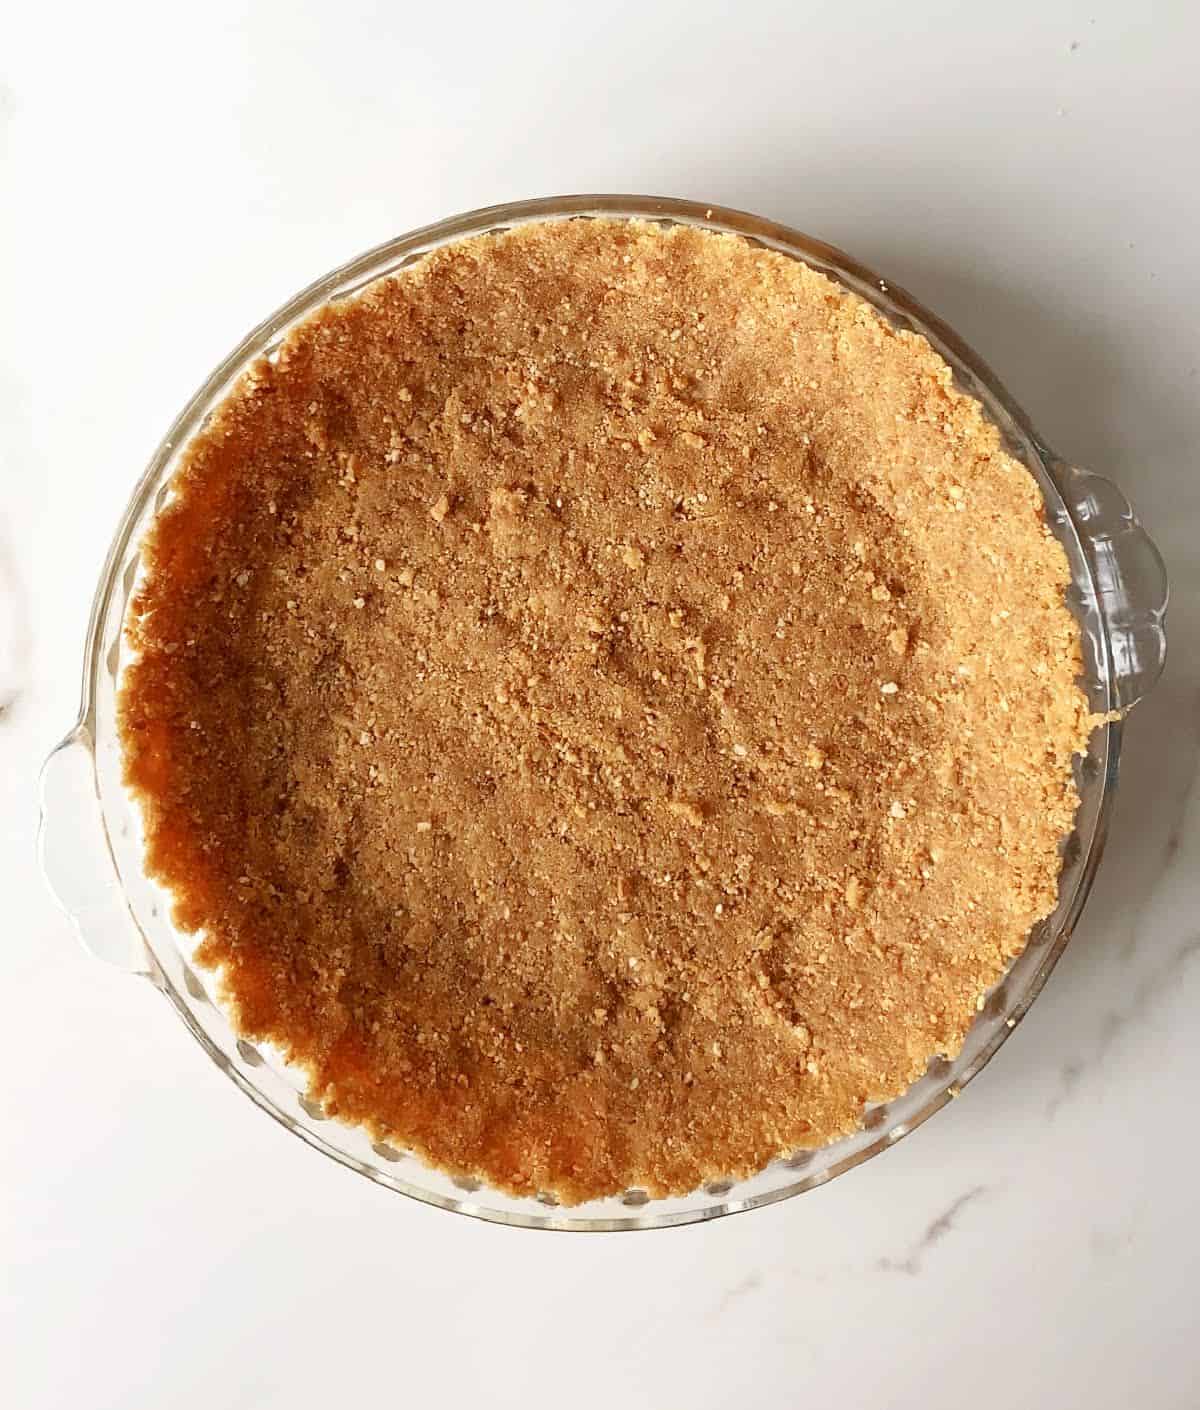 Graham cracker crust in a glass pie dish on a white marble surface. Top view.